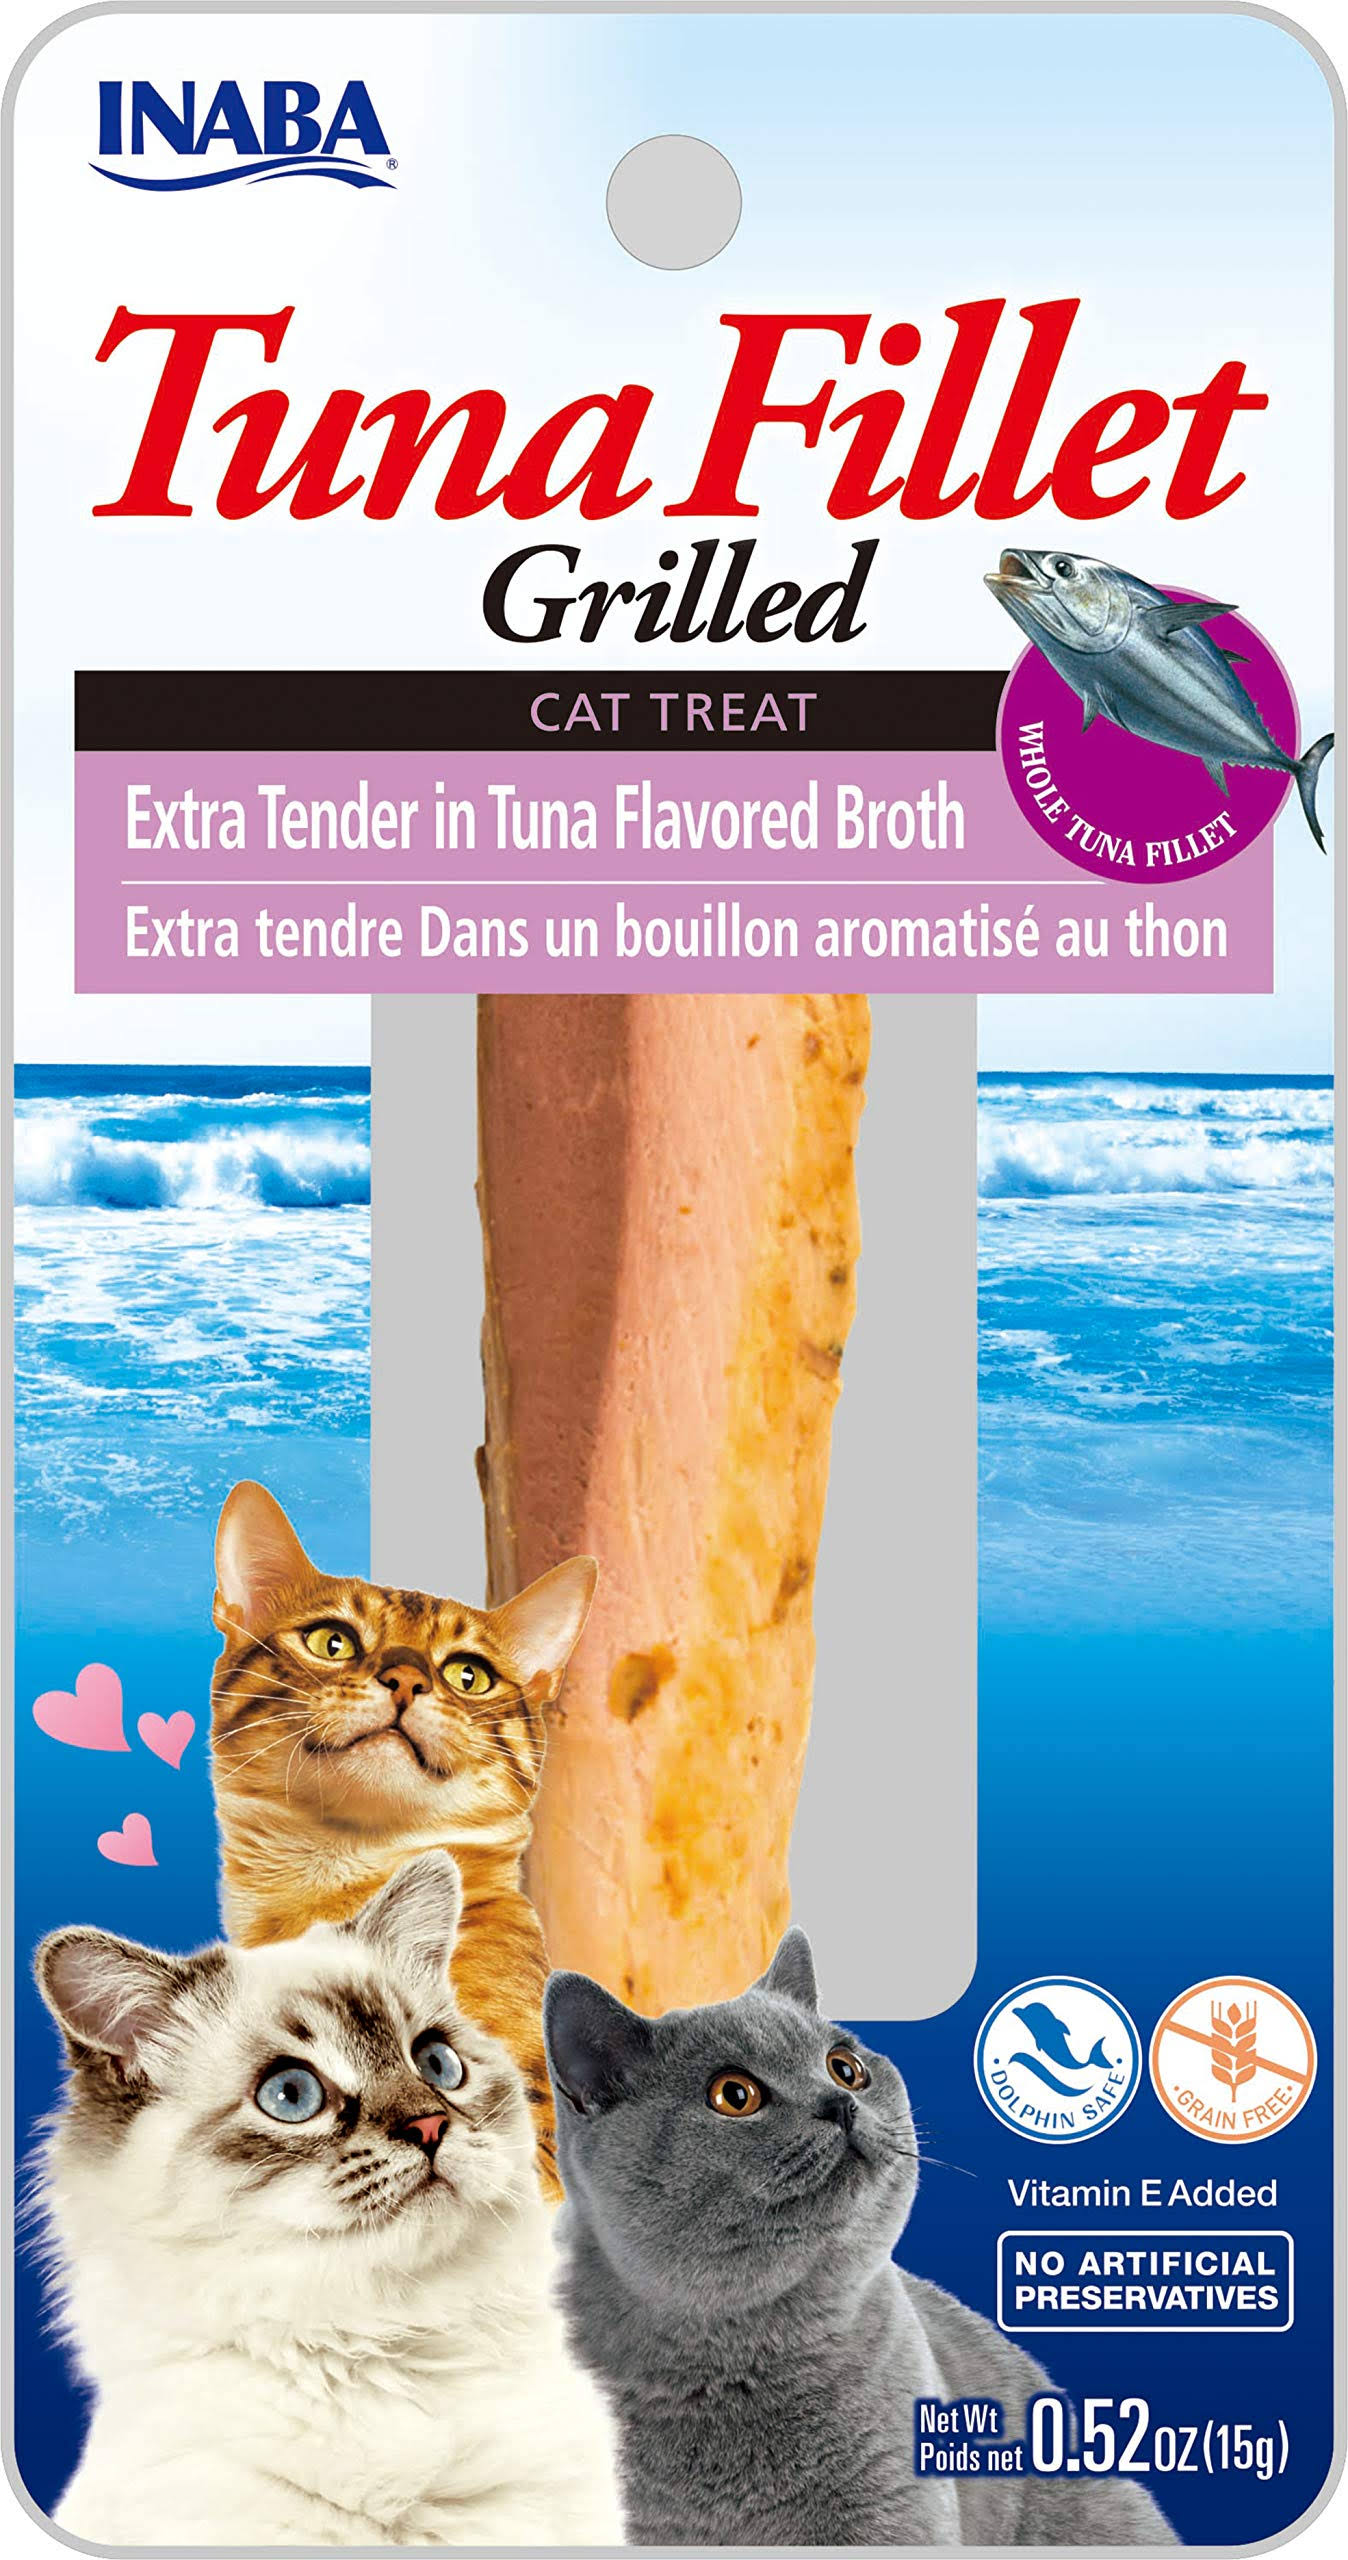 Inaba Ciao Grilled Fillet Treats - Available in Seven Flavours - XT Tuna Fllt Tuna Br